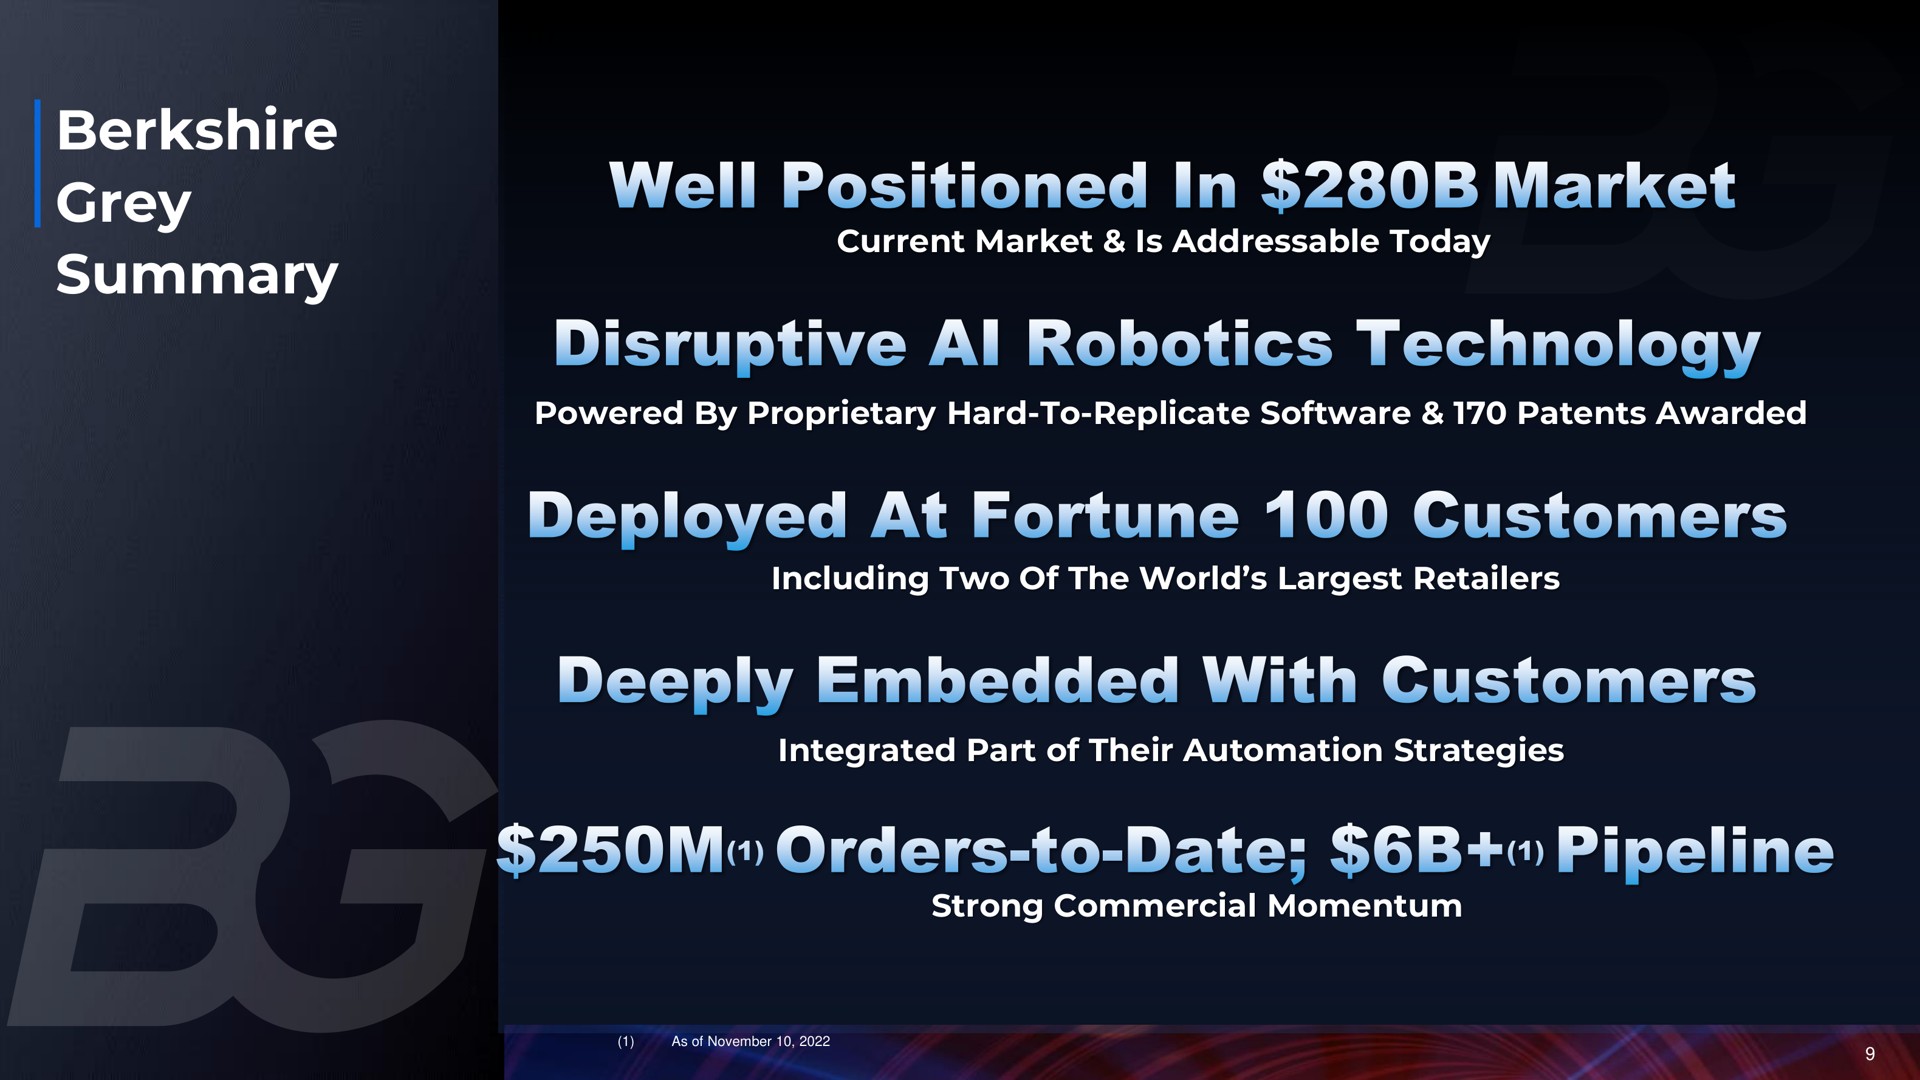 grey summary well positioned in market disruptive technology deployed at fortune customers deeply embedded with customers orders to date pipeline | Berkshire Grey